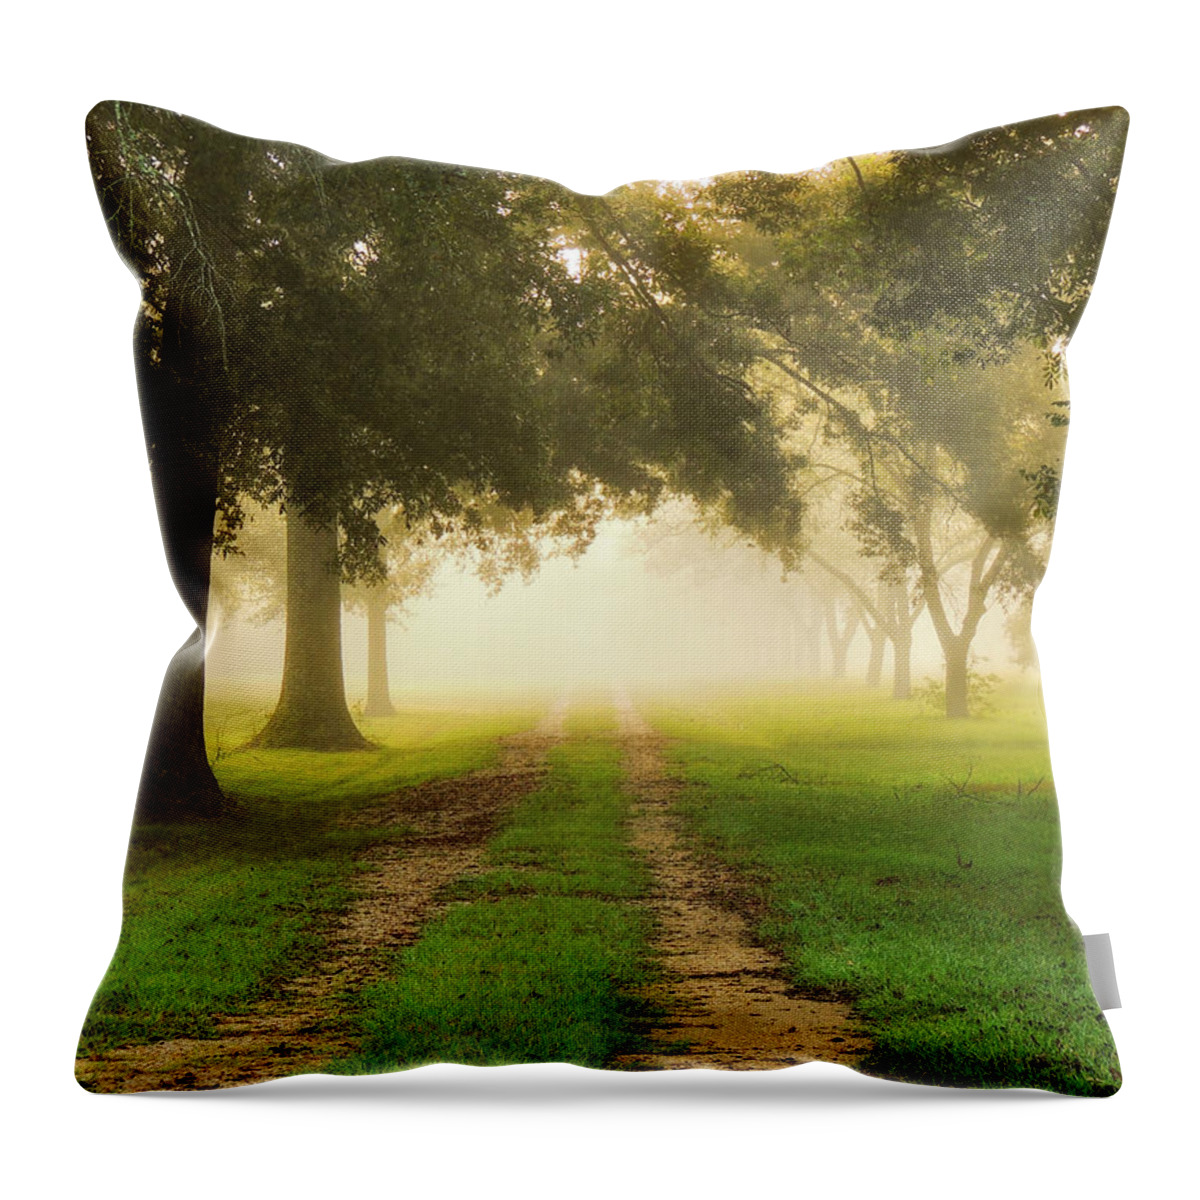 Fog Throw Pillow featuring the photograph Journey Into Fall by Charlotte Schafer